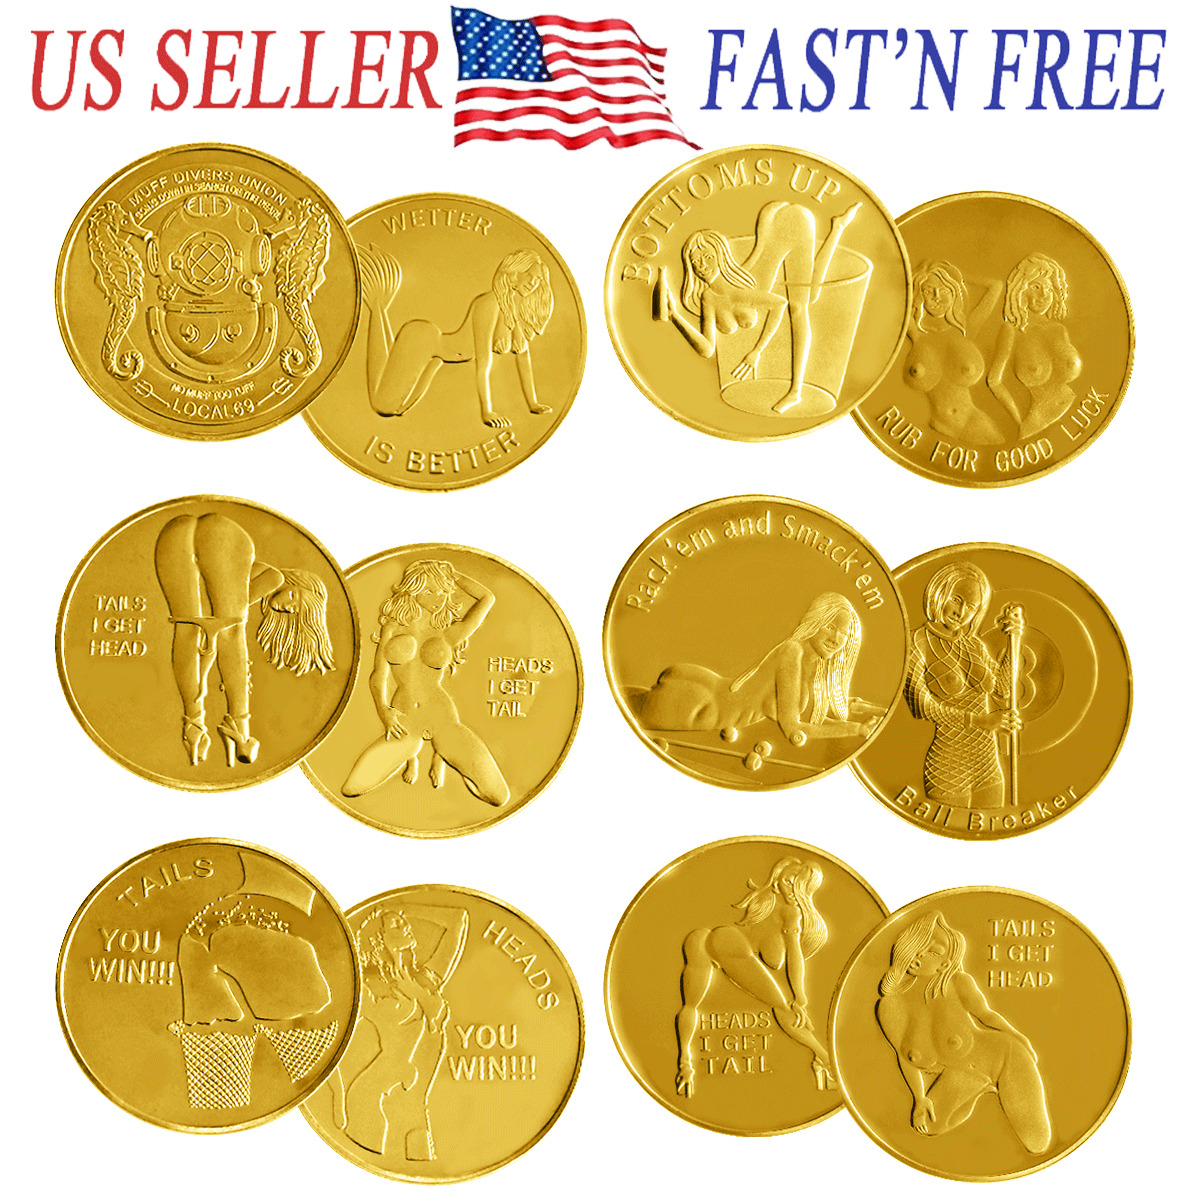 6PCS Good Luck Heads Tails Gold Token Challenge Coins Sexy Girl Gift For Man